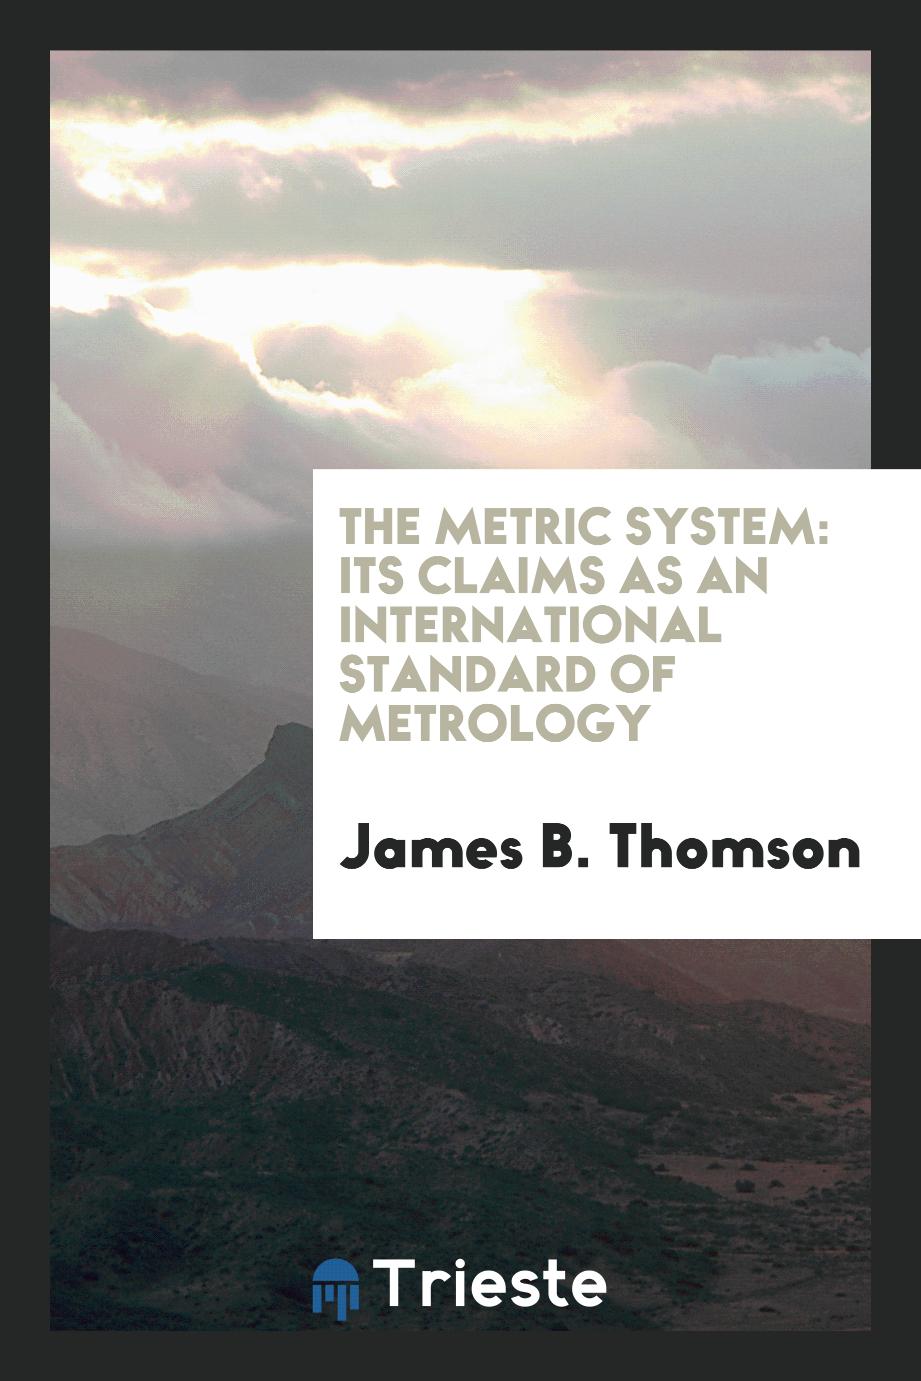 The Metric System: Its Claims as an International Standard of Metrology